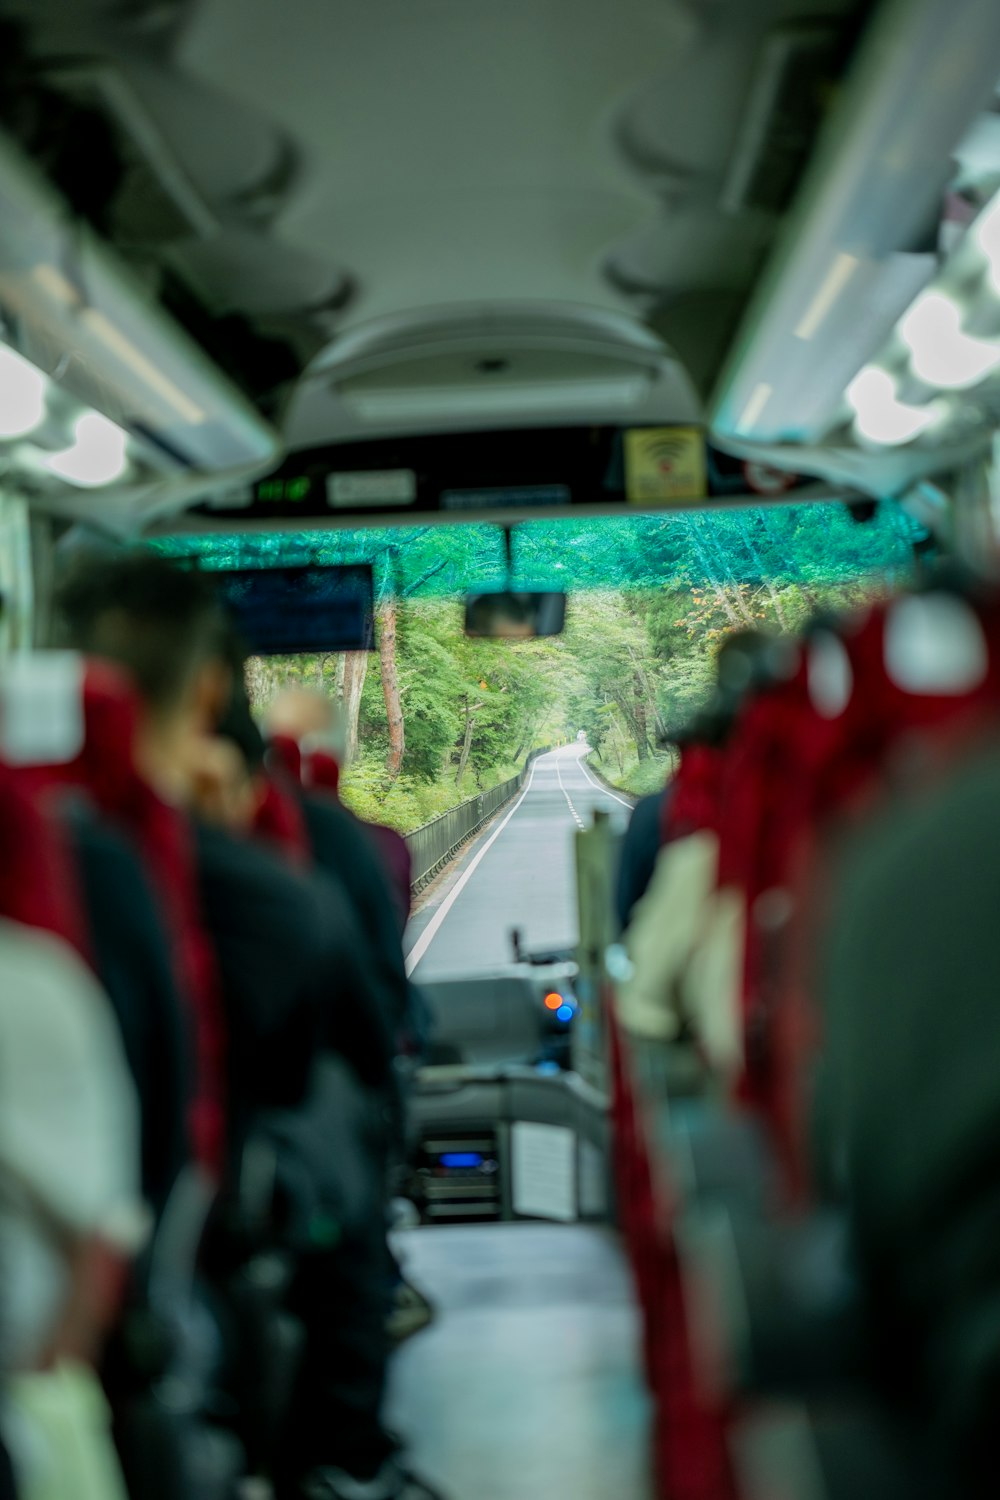 a view of the inside of a bus looking down the aisle